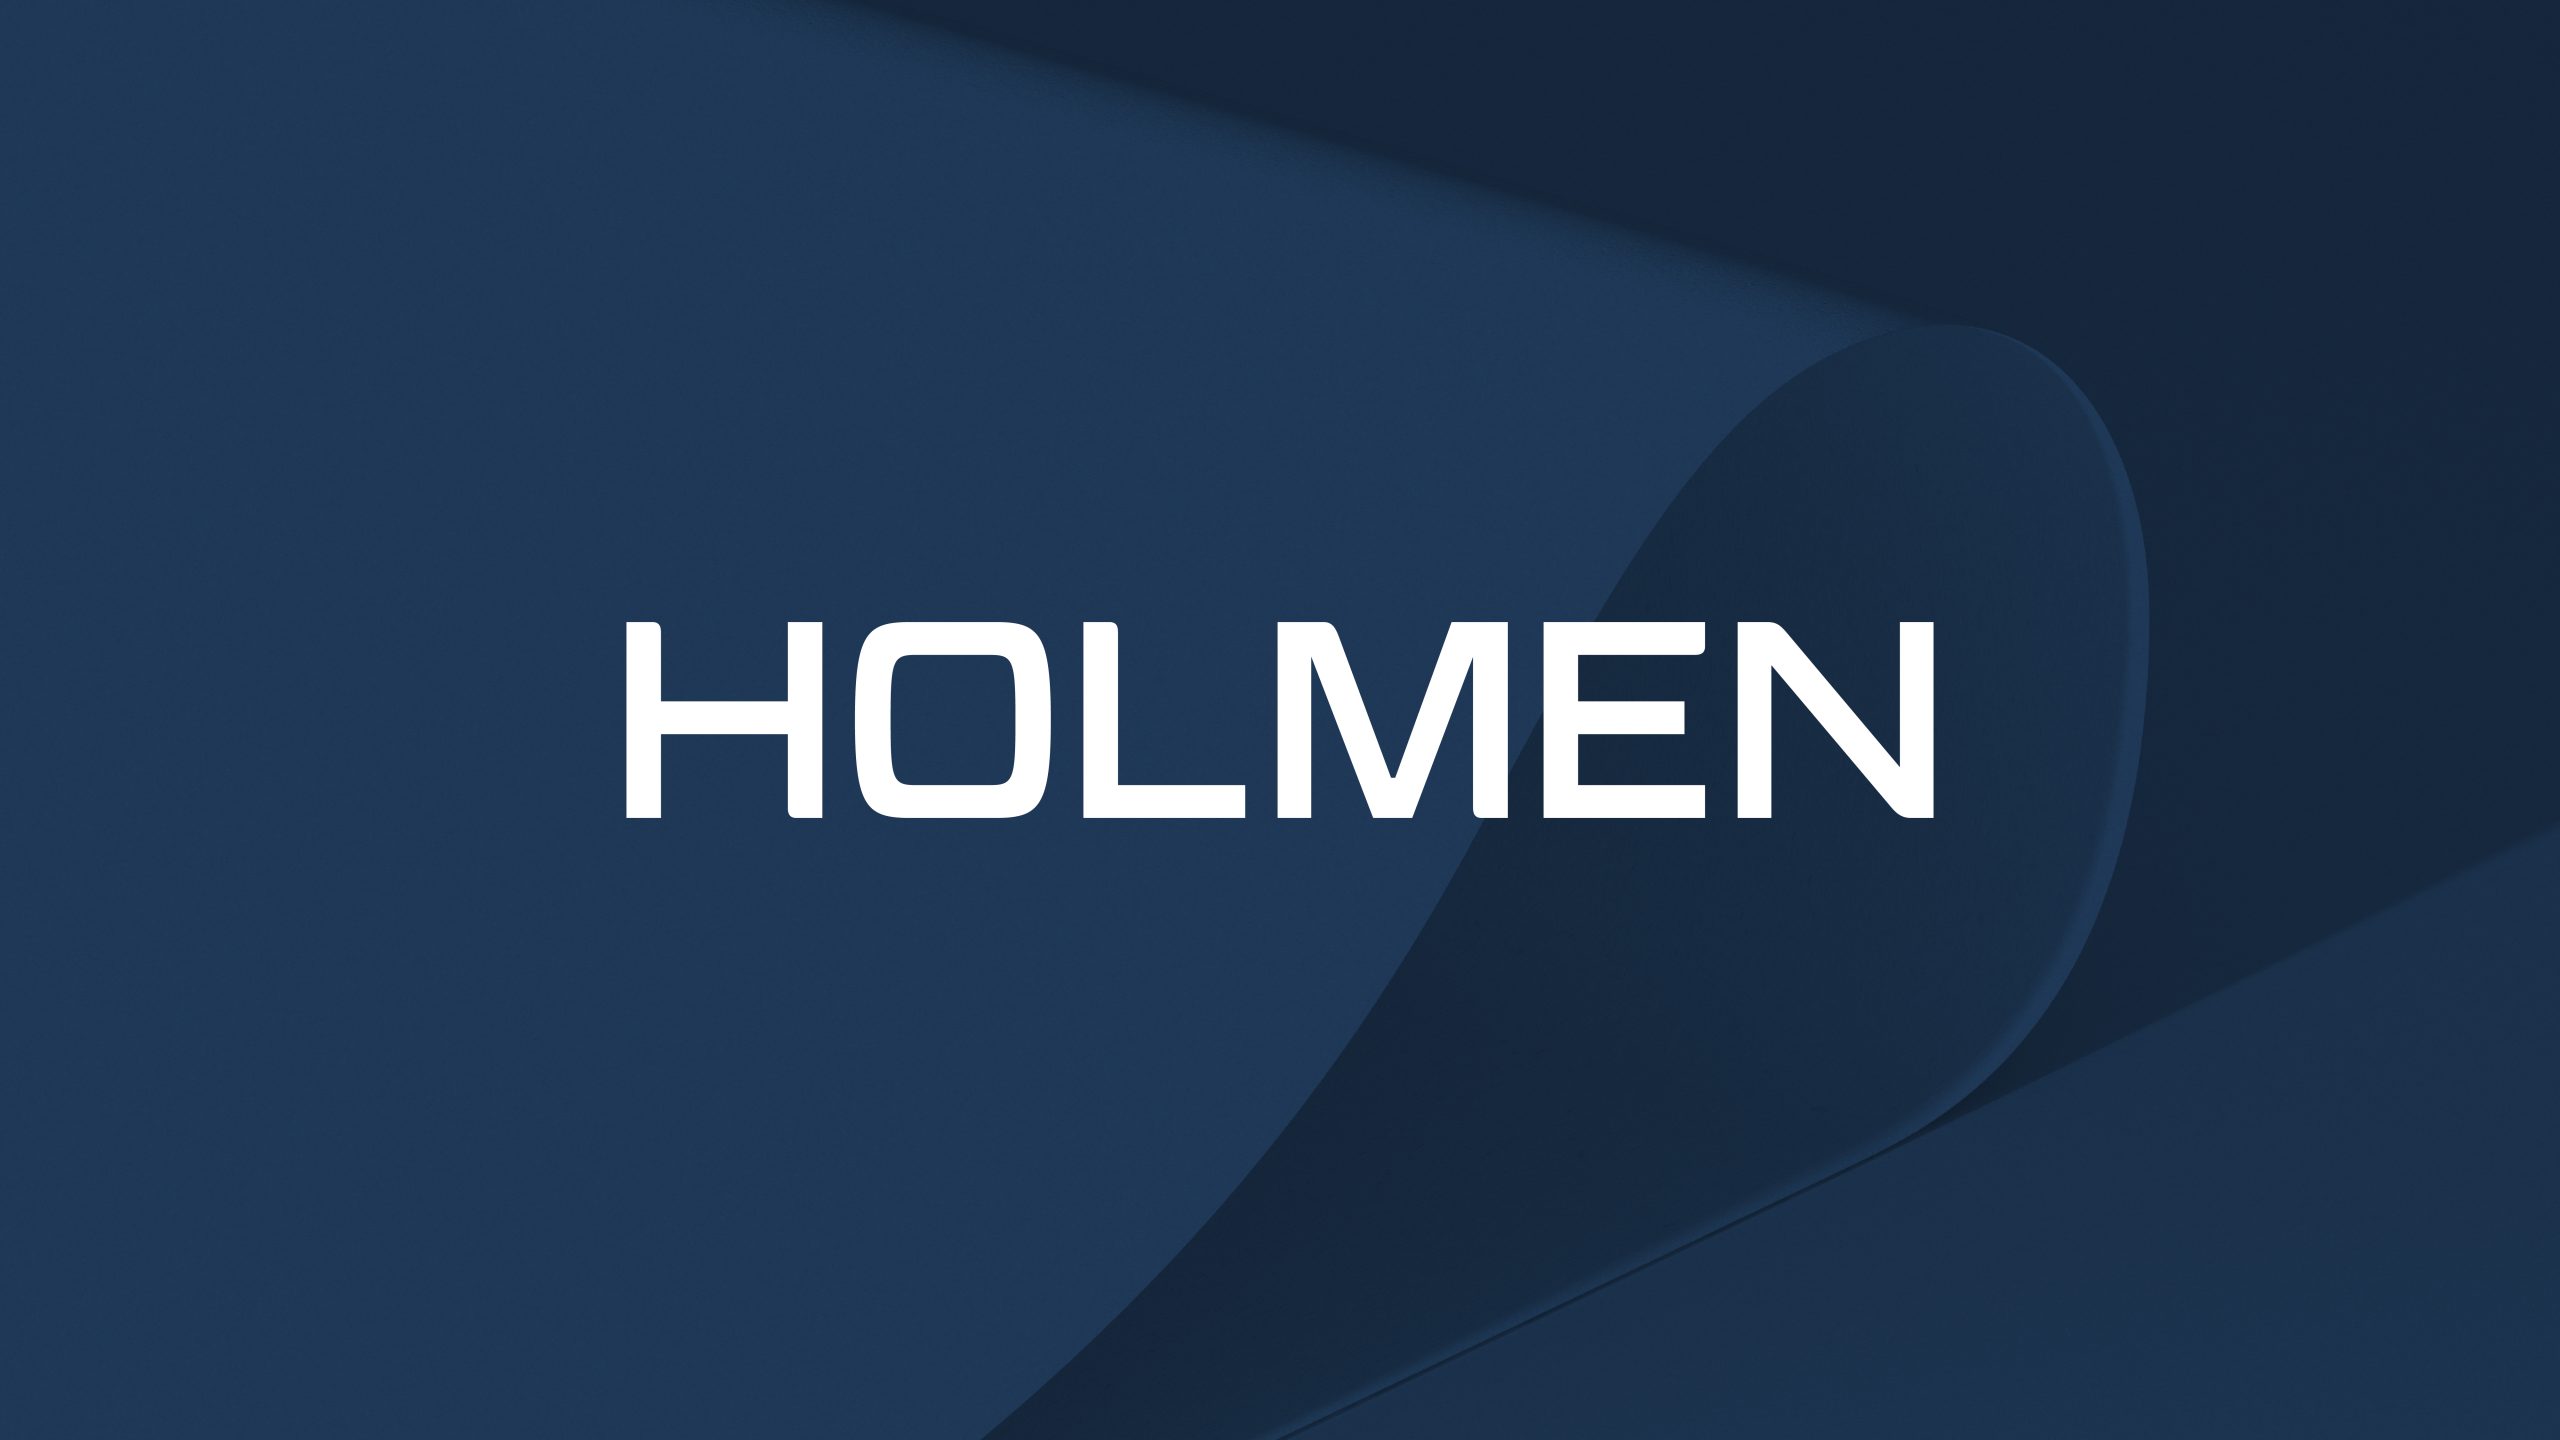 Holmen – Nature and technology